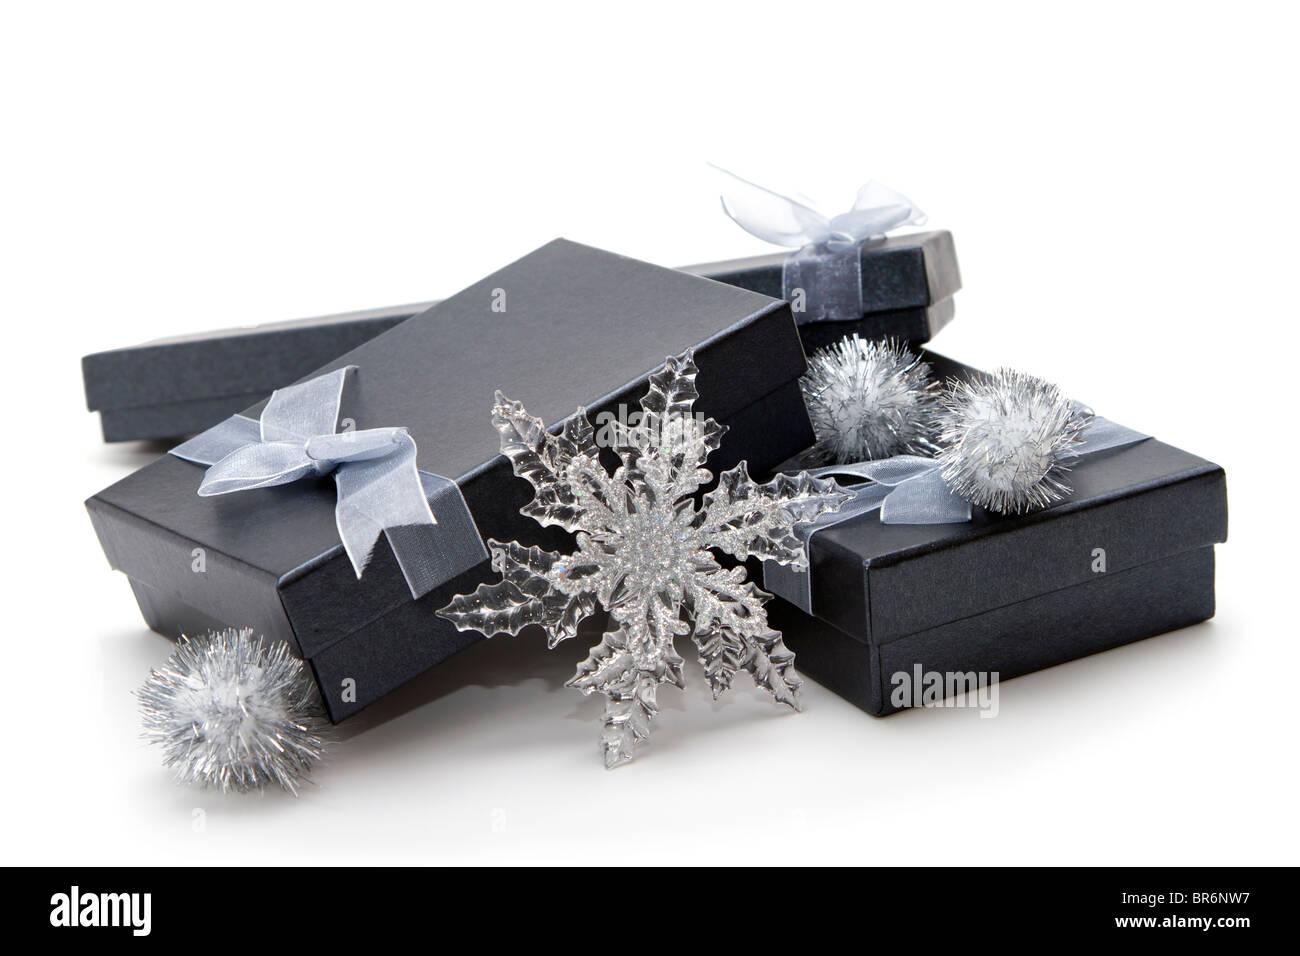 Elegant black and silver presents for Christmas giving Stock Photo